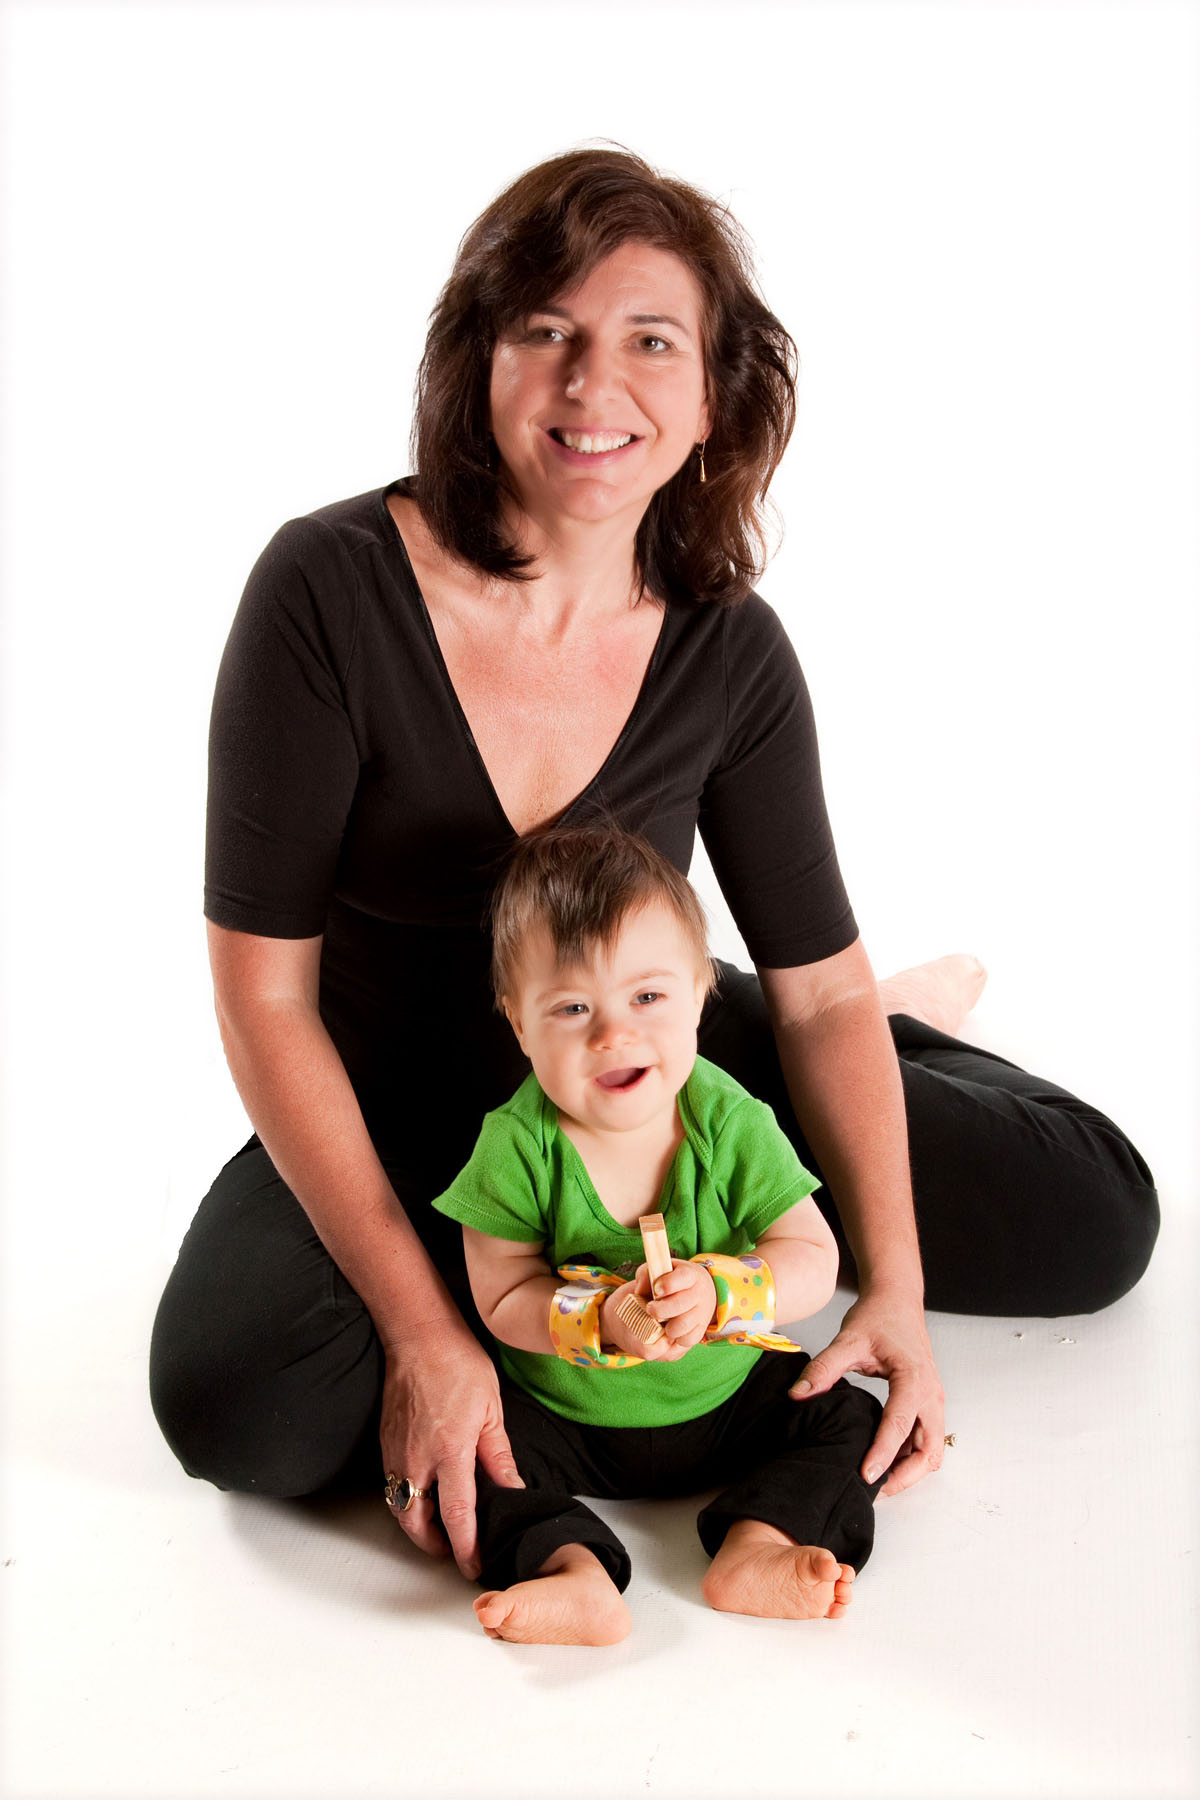 The child-size wrist and ankle weights Isabella Yosuico created for her son grew into Mighty Tykes.